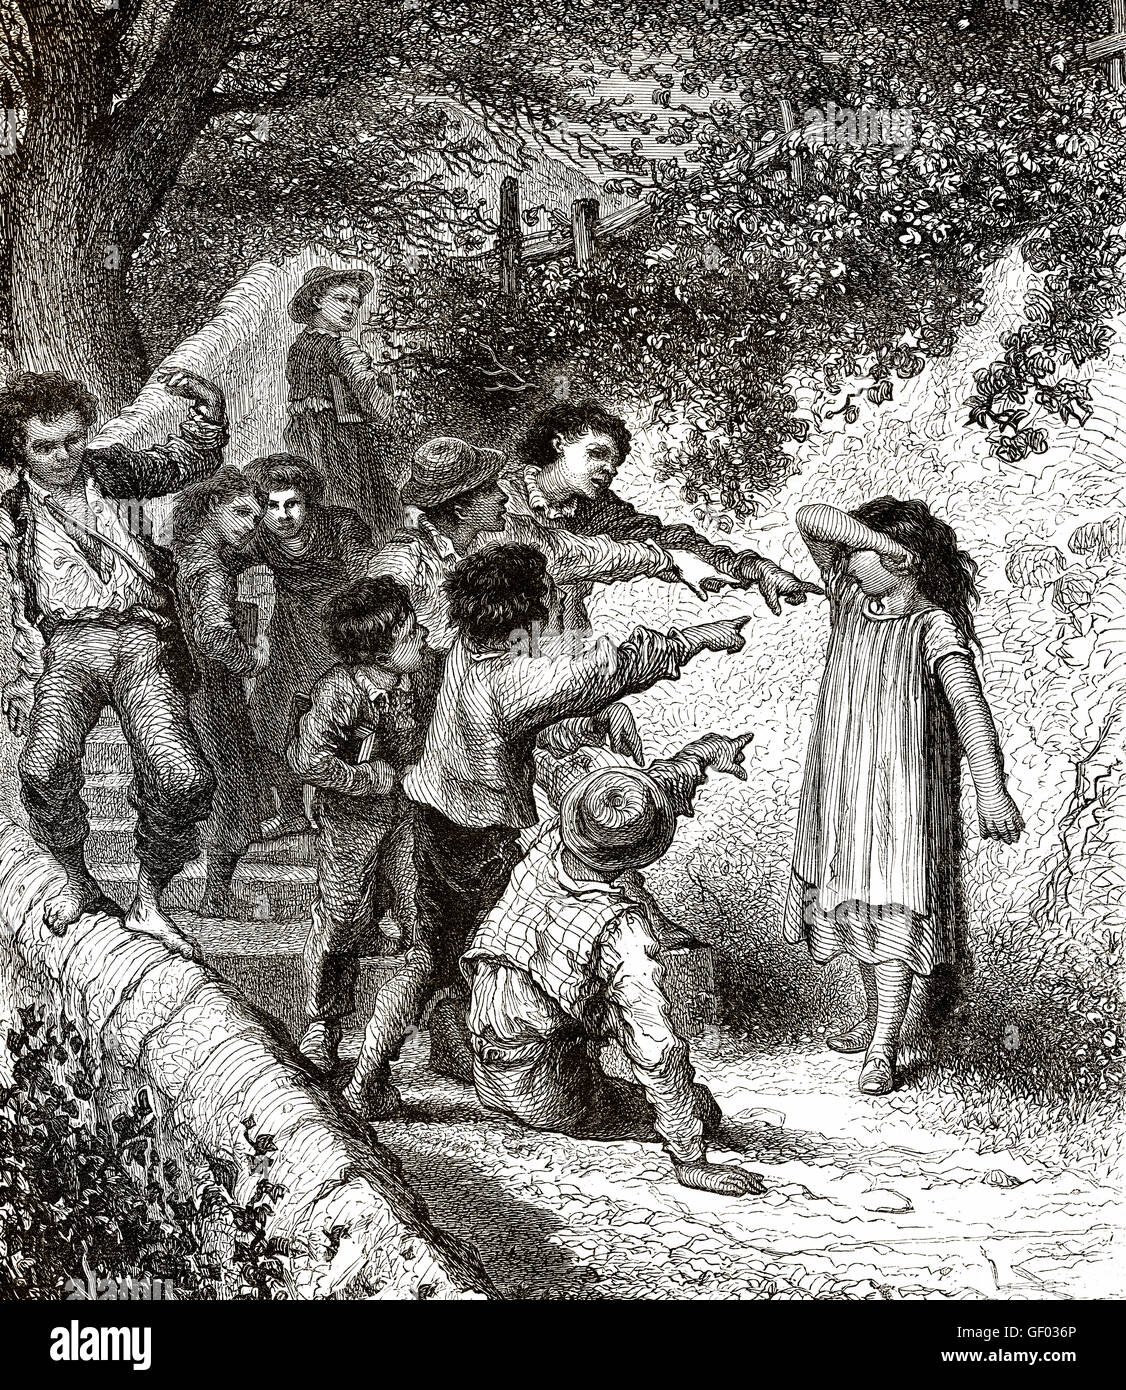 Children bullying of an individual by a group, 19th century Stock Photo